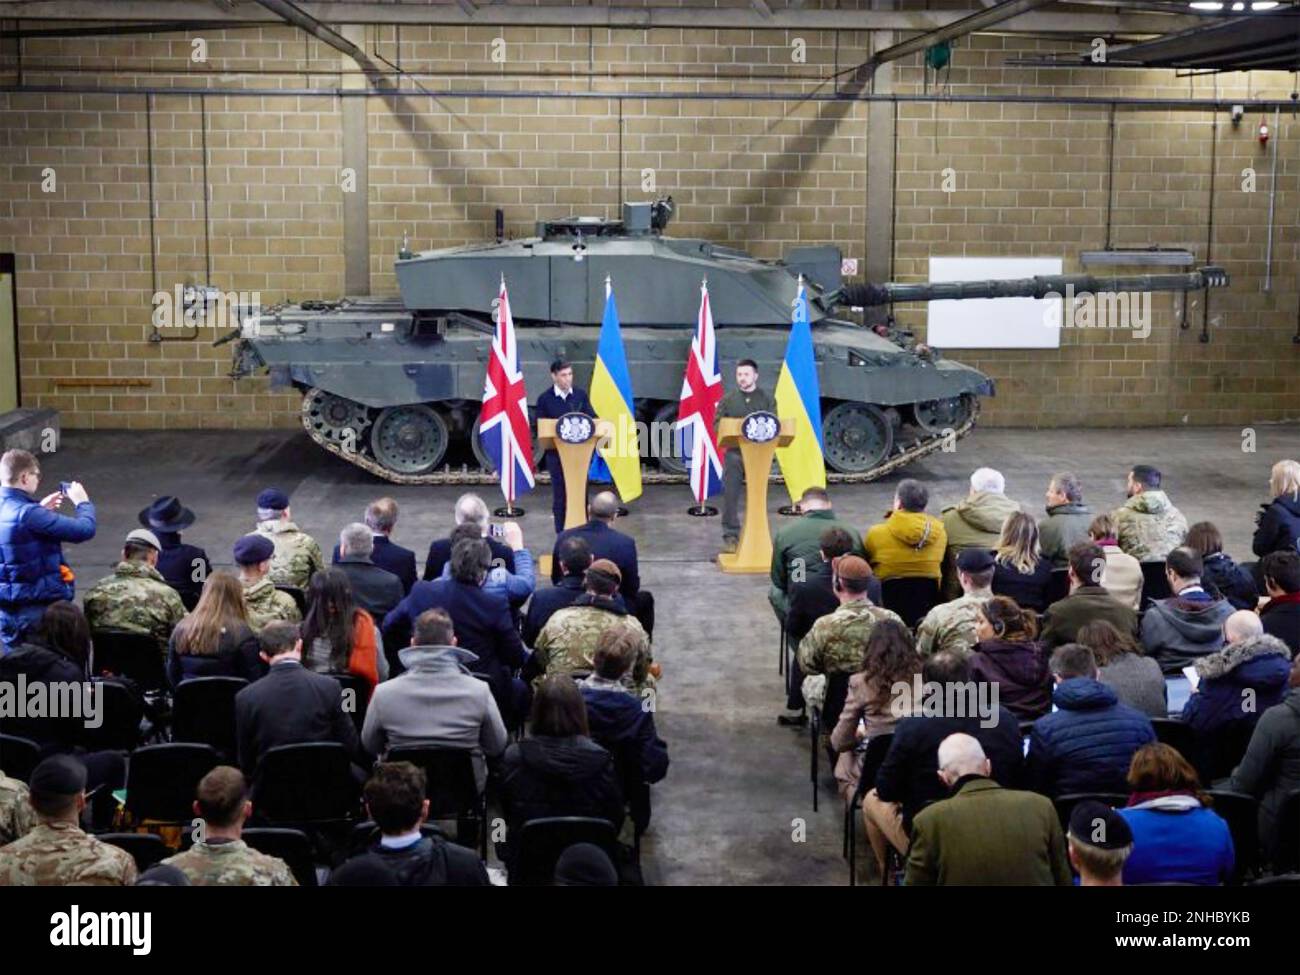 VOLODYMYR  ZELENSKY President of Ukraine is welcomed to the UK by UK Prime Minister Rishi Sunak on 8 February 2023 with a Challenger tank behind them. Stock Photo